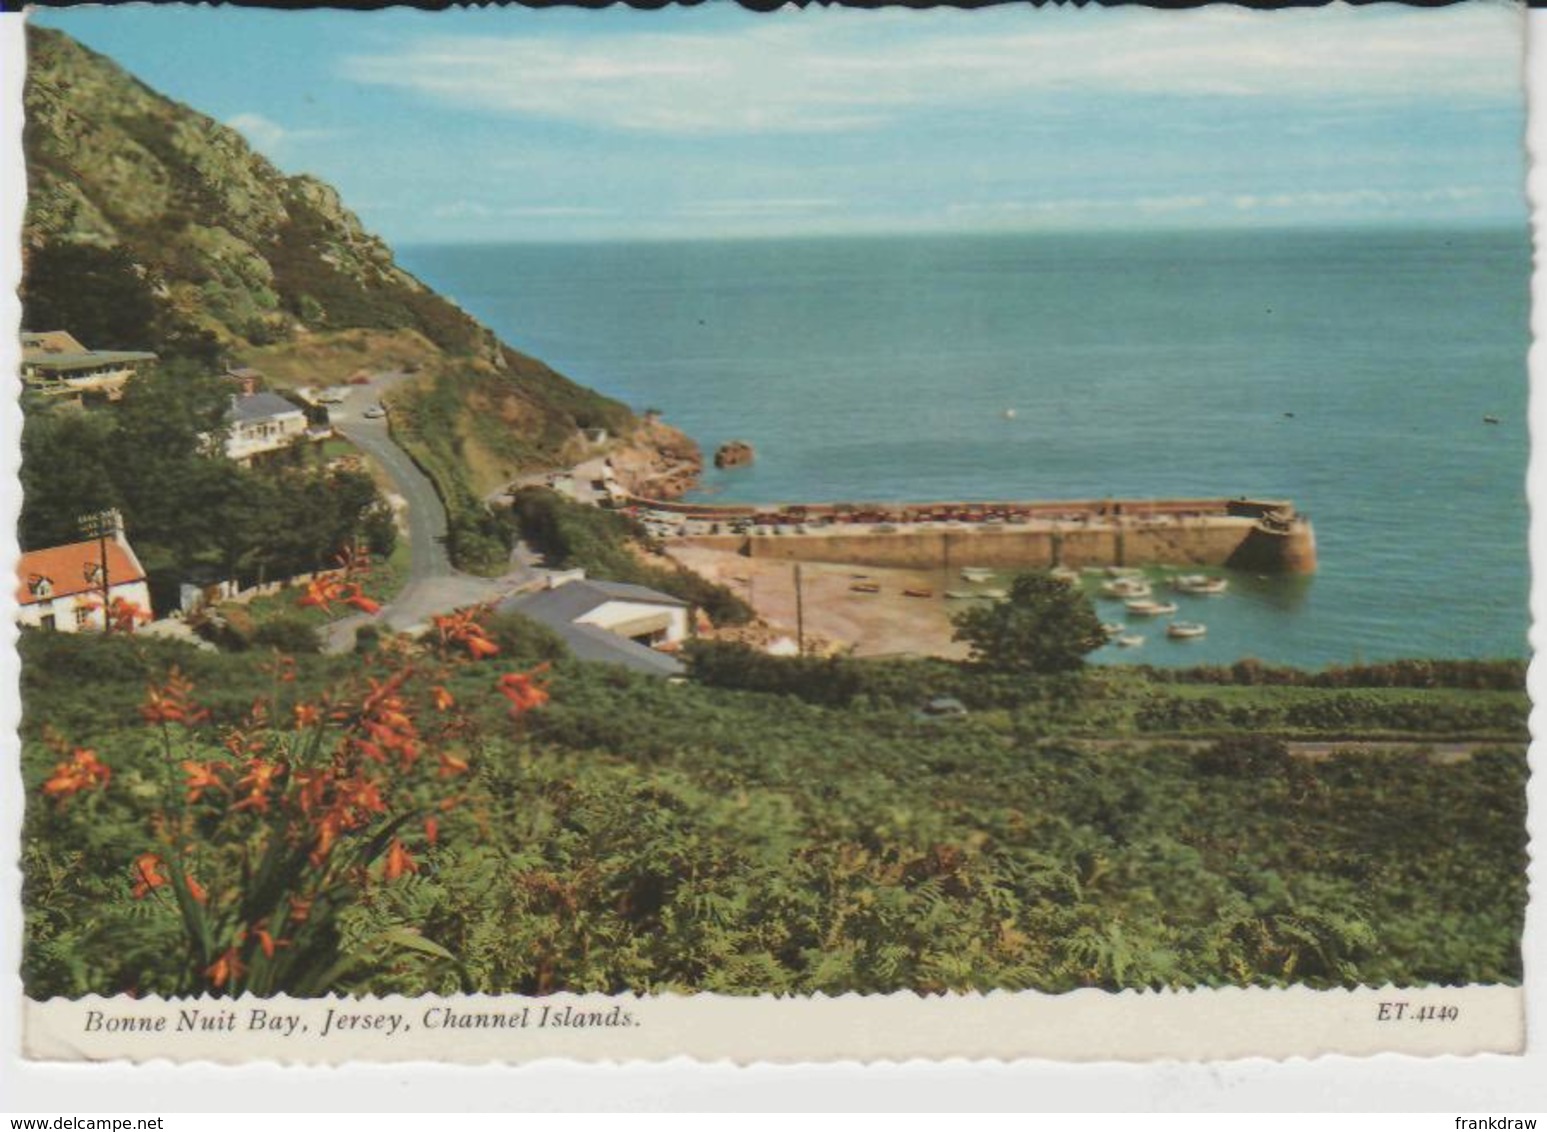 Postcard - Bonne Nuit Bay,Jersey, Channel Islands - Posted  22nd Aug 1968 Very Good - Unclassified